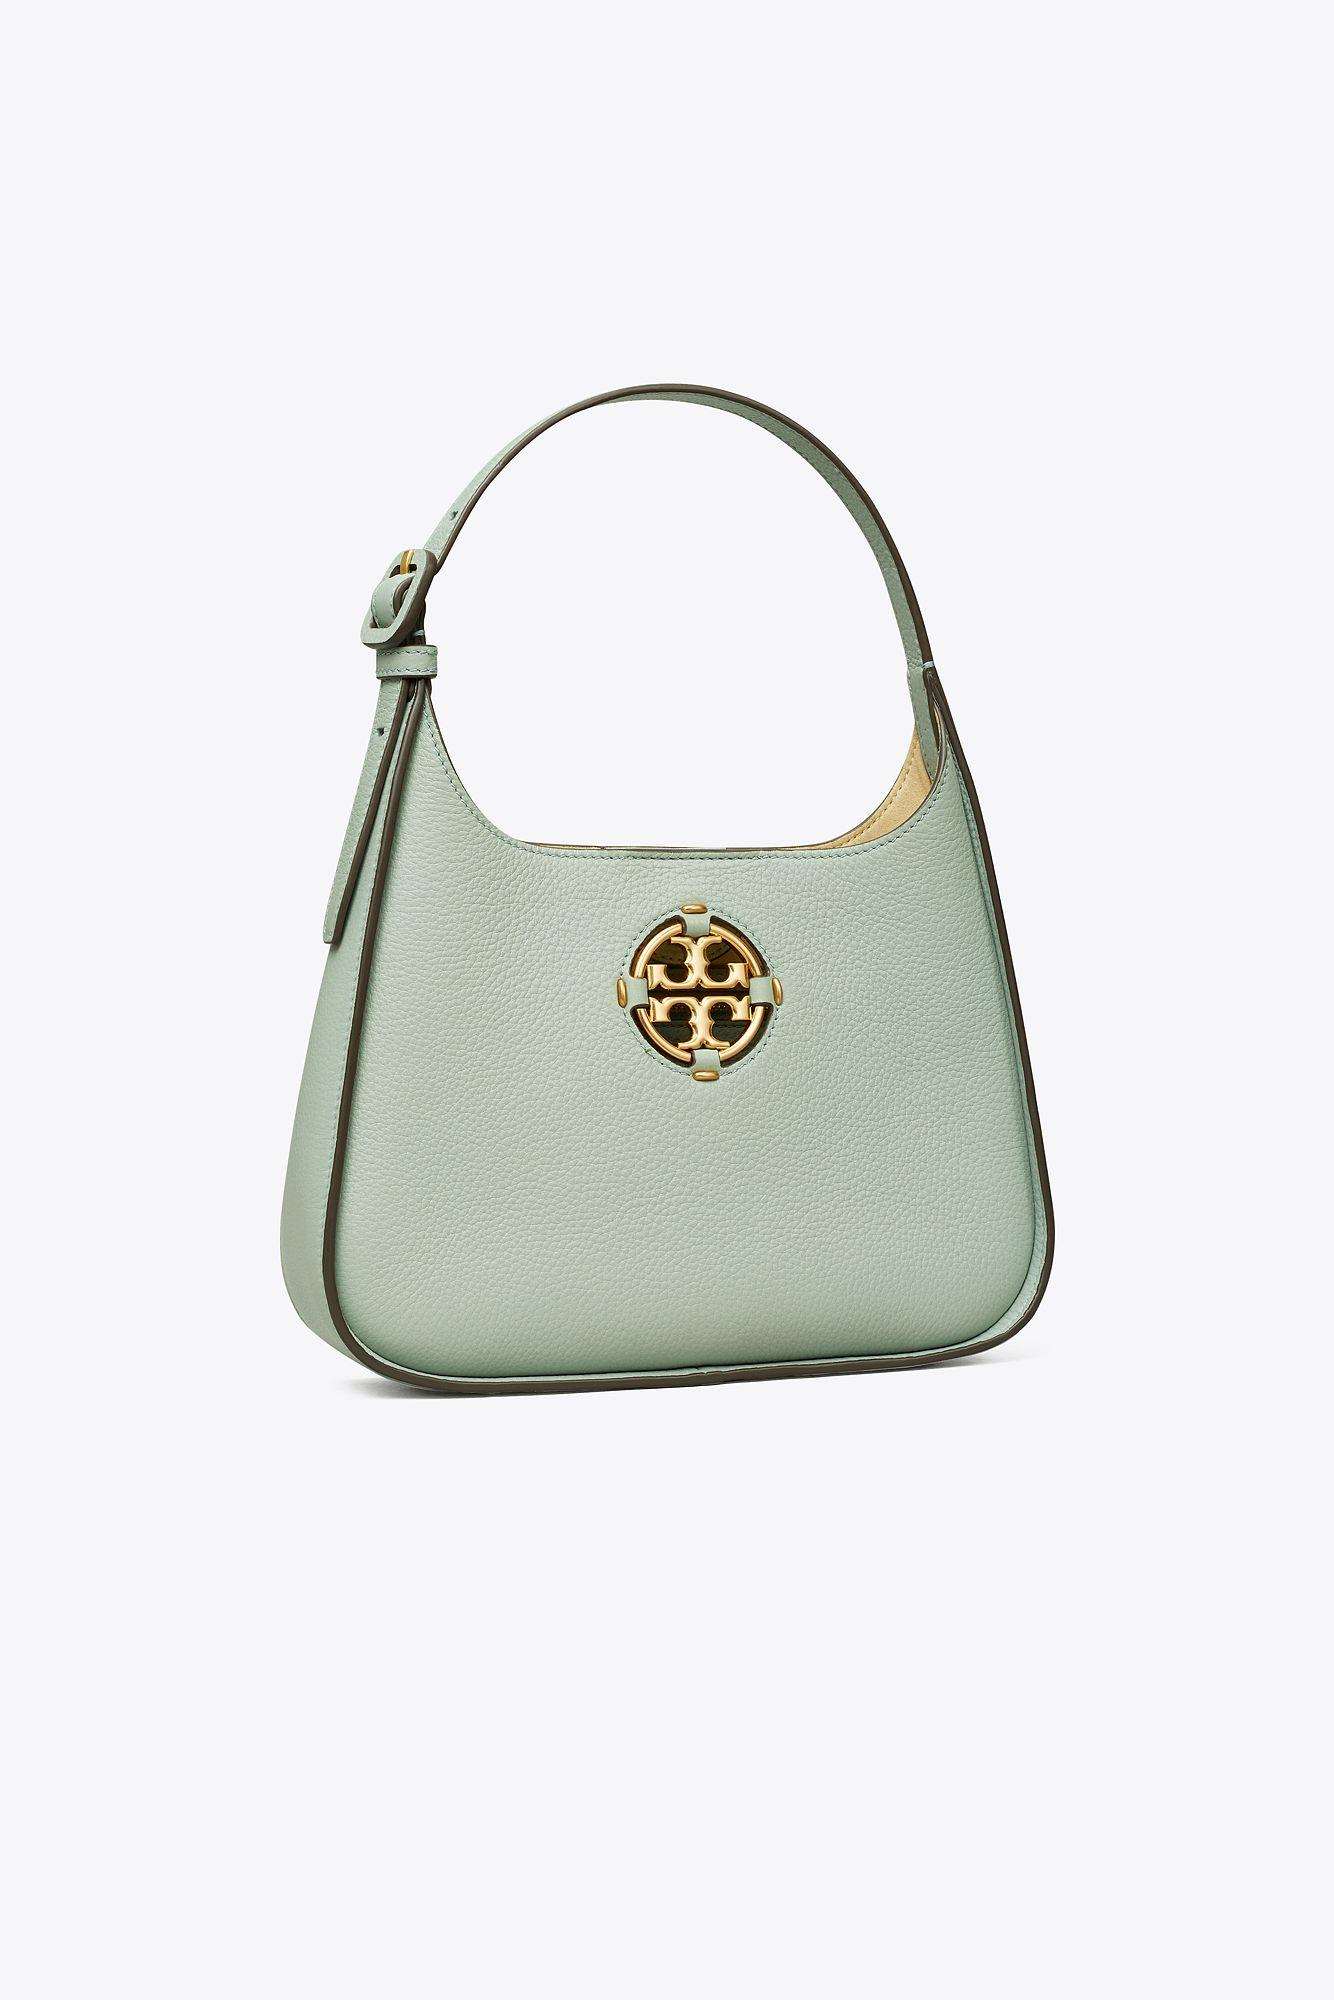 Tory Burch Miller Small Classic Shoulder Bag in Green